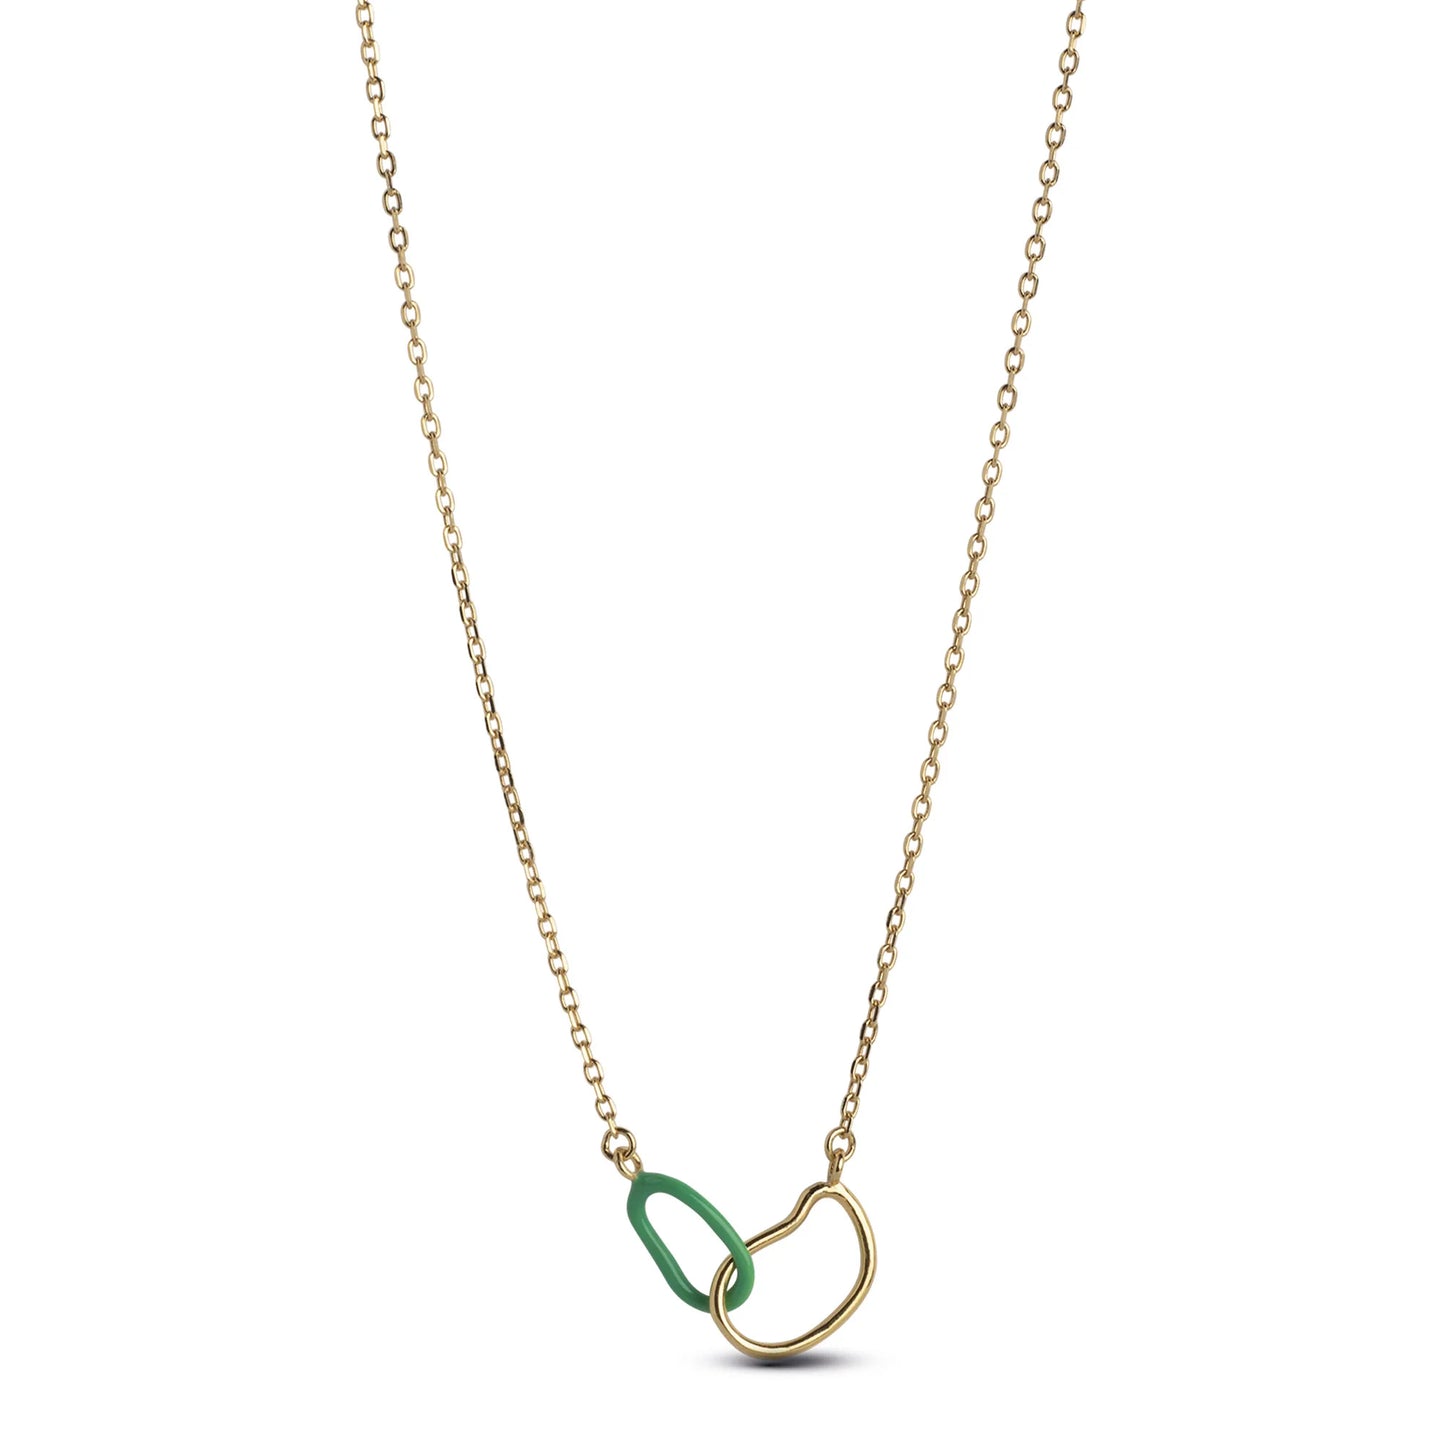 Organic Double Circle Necklace - Green